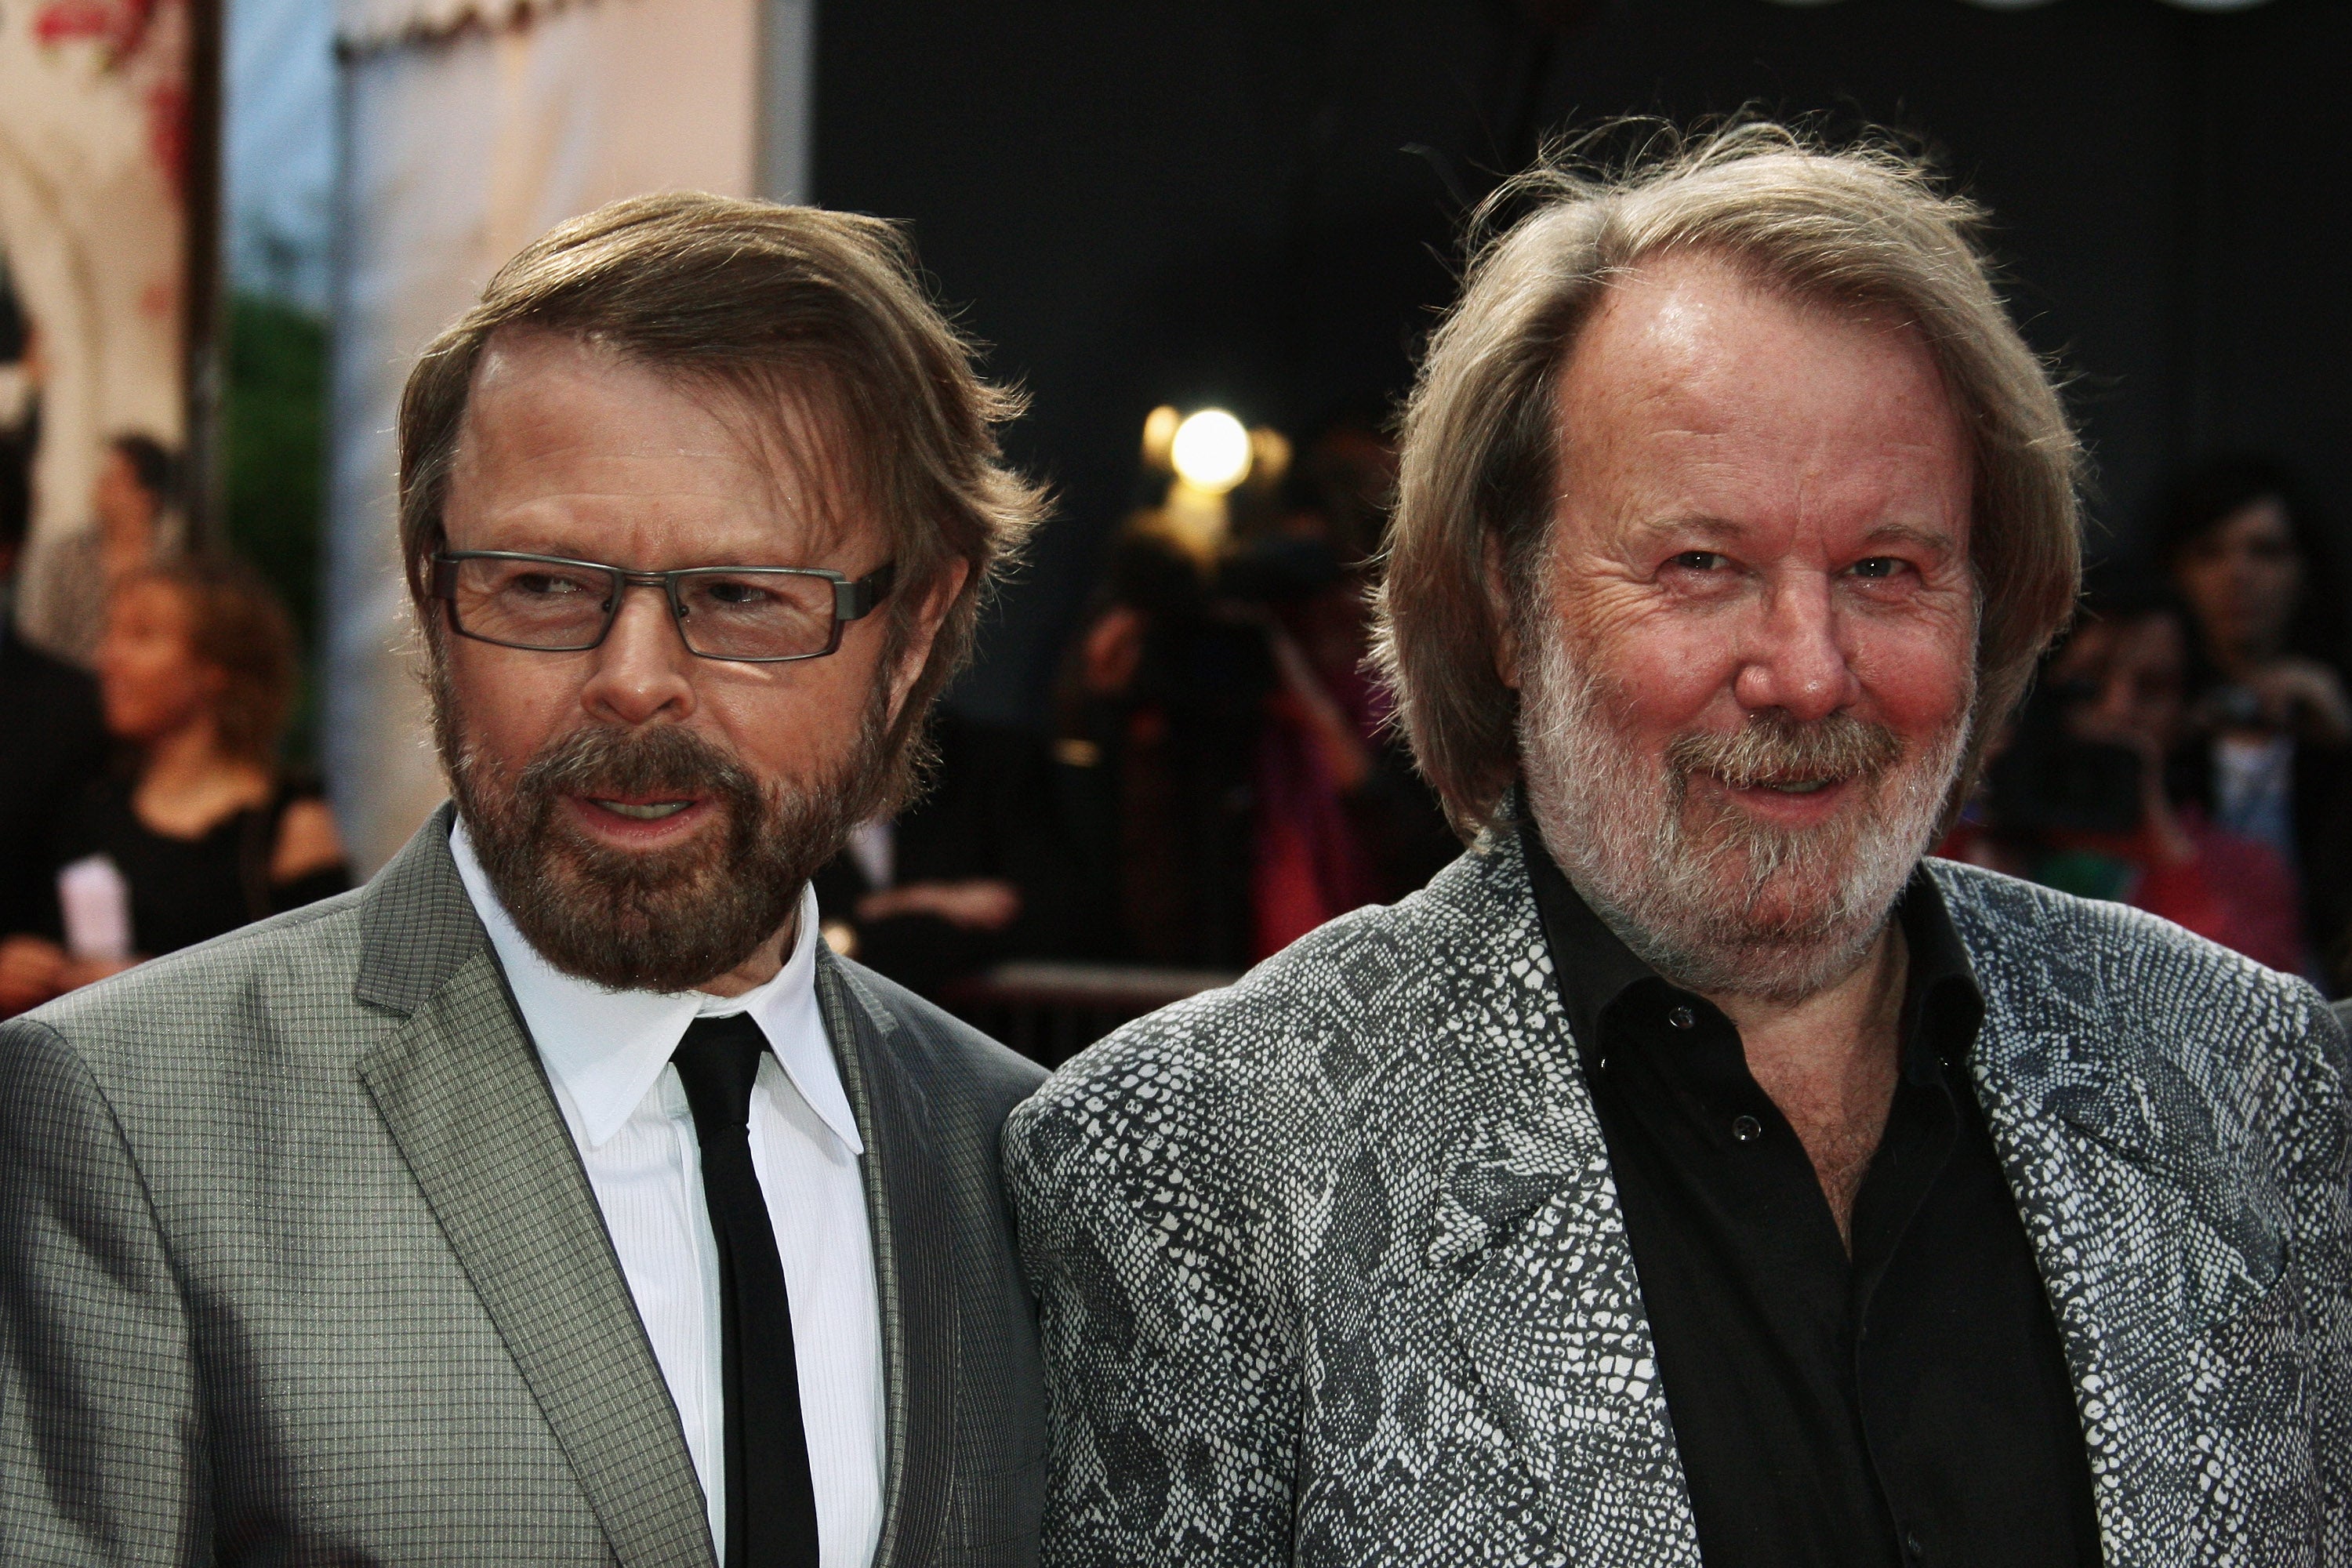 Abba's Bjorn Ulvaeus and Benny Anderson are teaming up with Avicii for Sweden's 2013 Eurovision entry